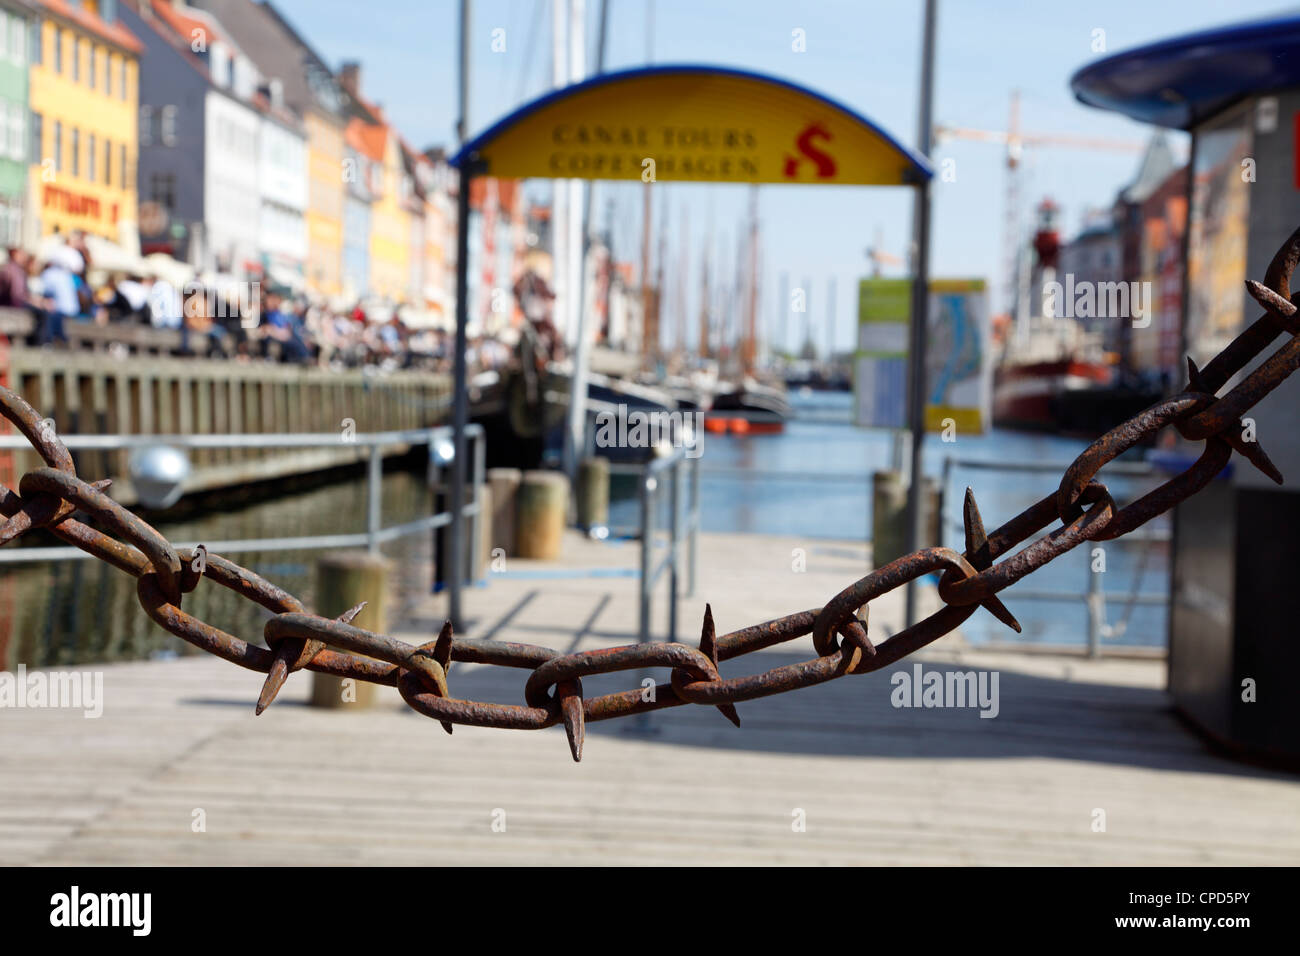 No entry at the Canal Tours in Nyhavn, port of Copenhagen, Denmark. A spiked and rusty chain is blocking this entrance. Stock Photo